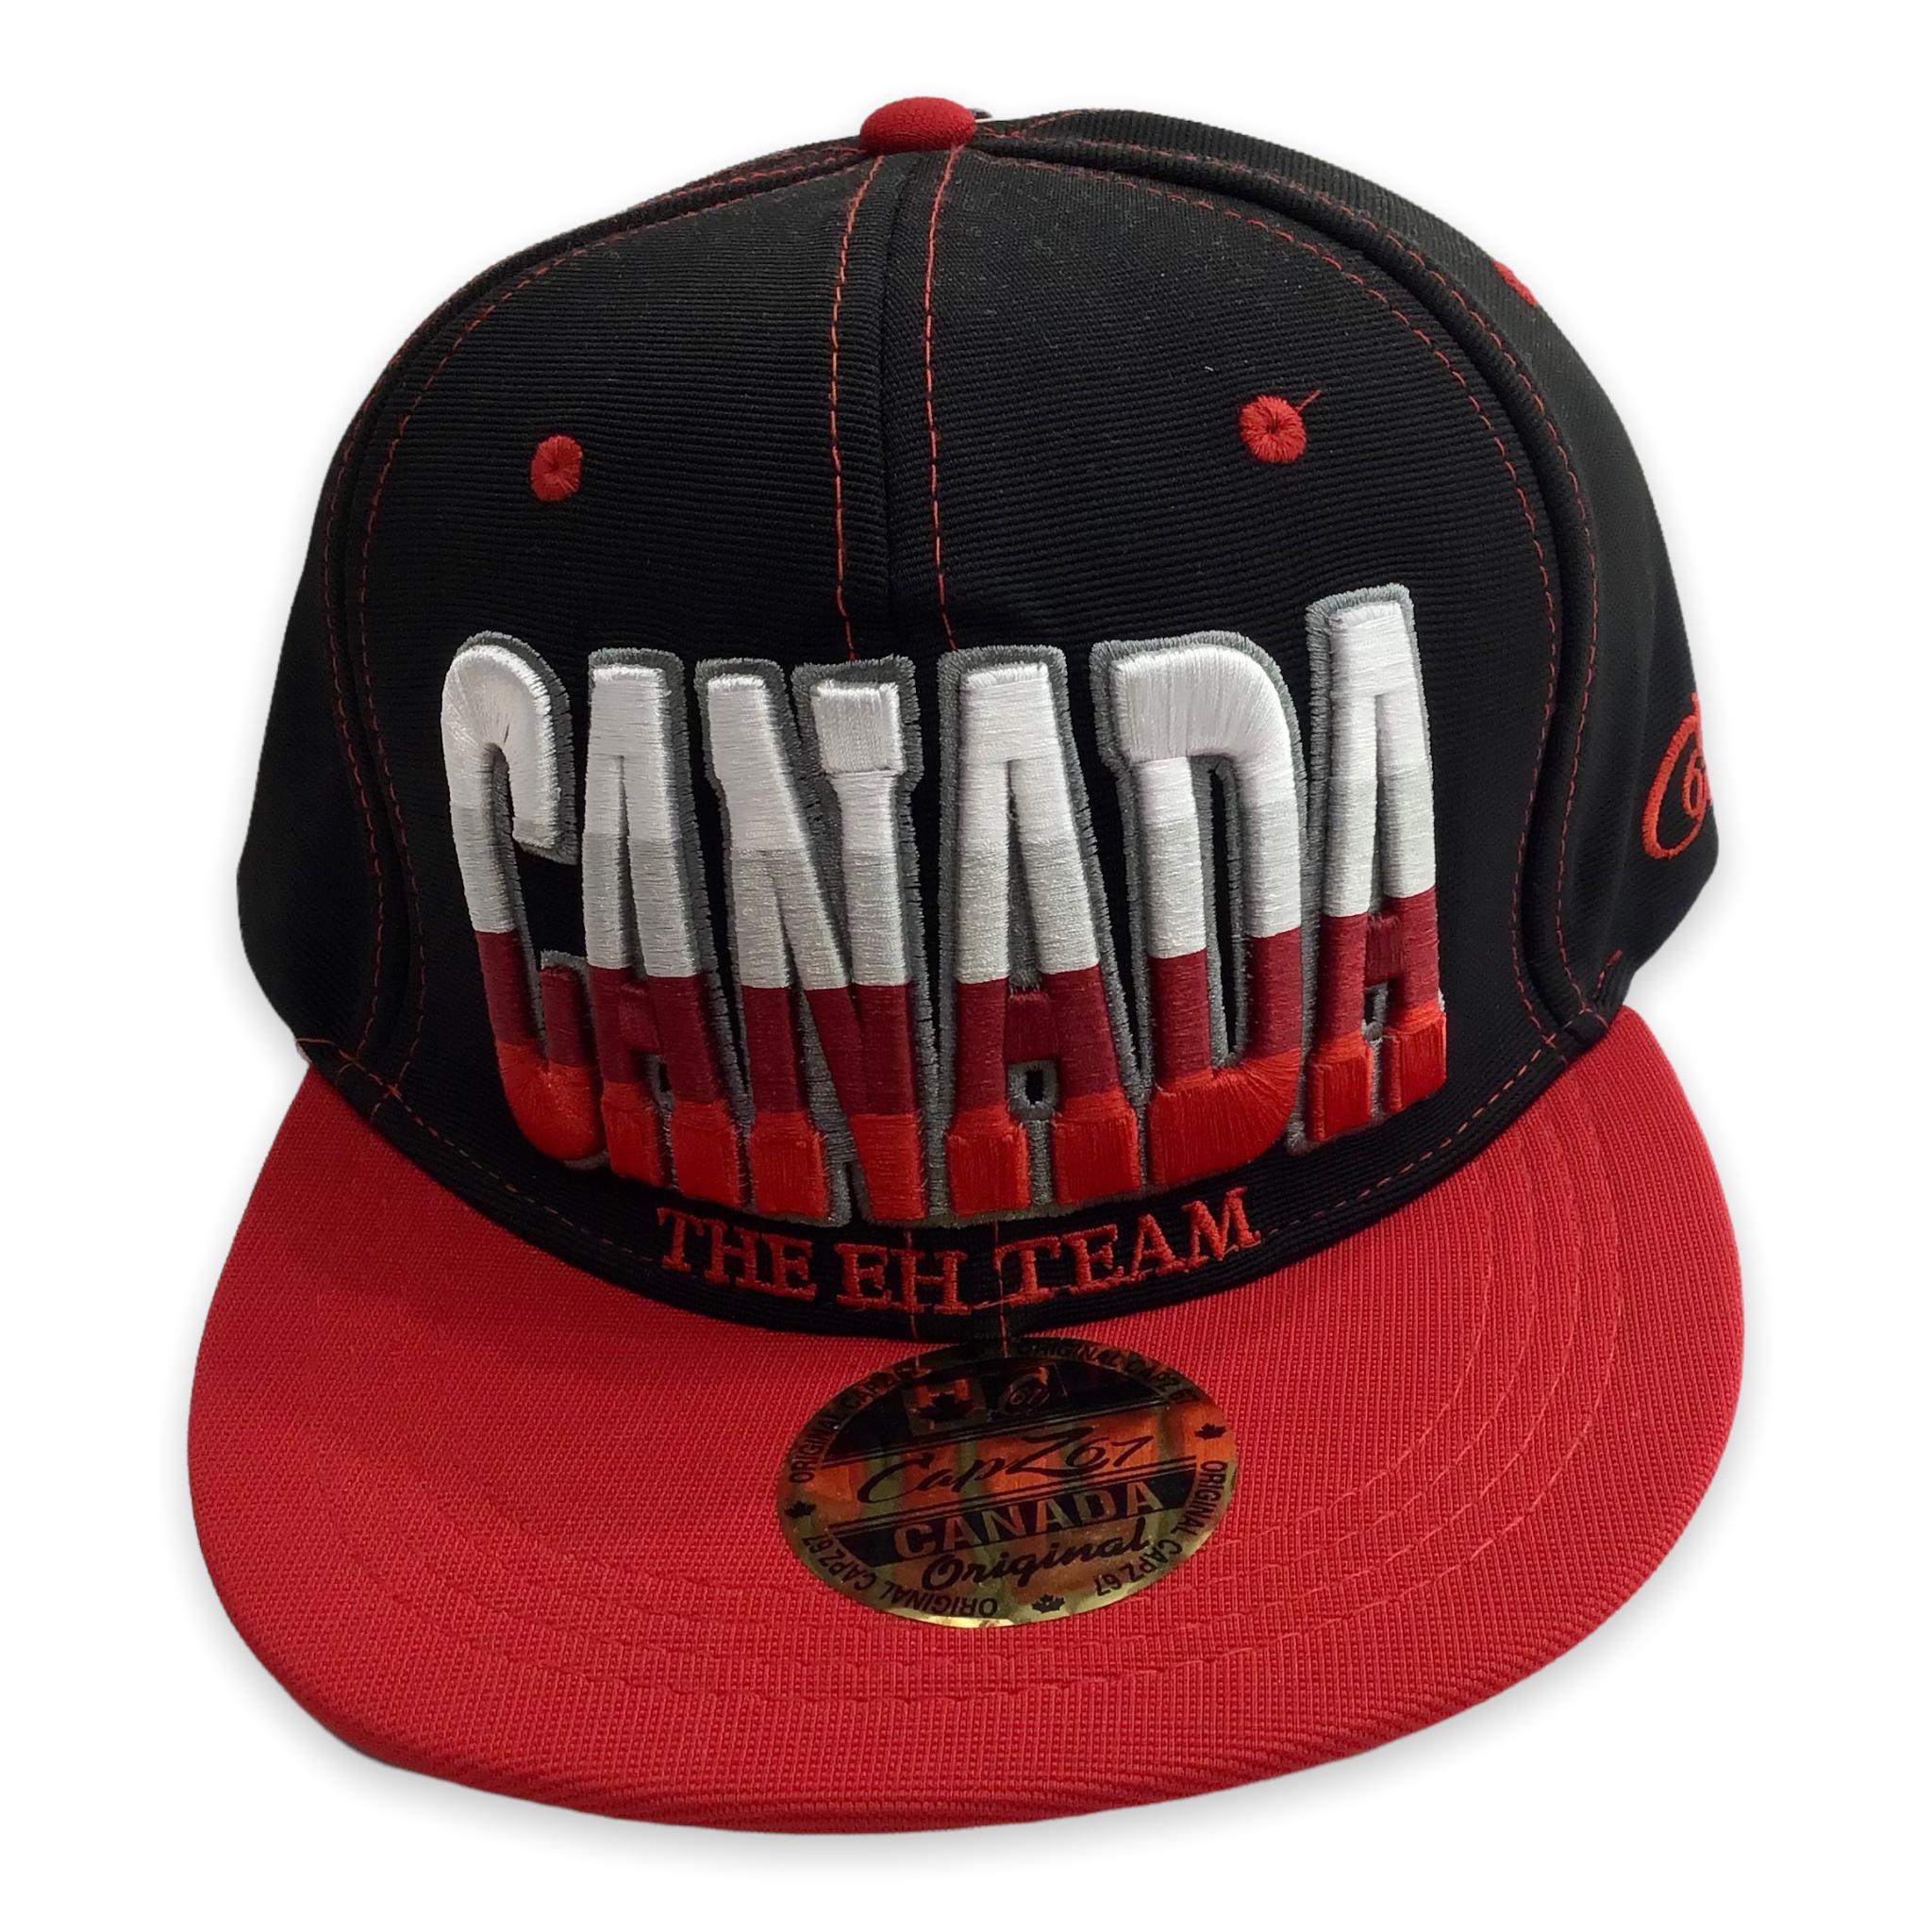 Baseball Cap - Canada The Eh Team Red and Black Hat